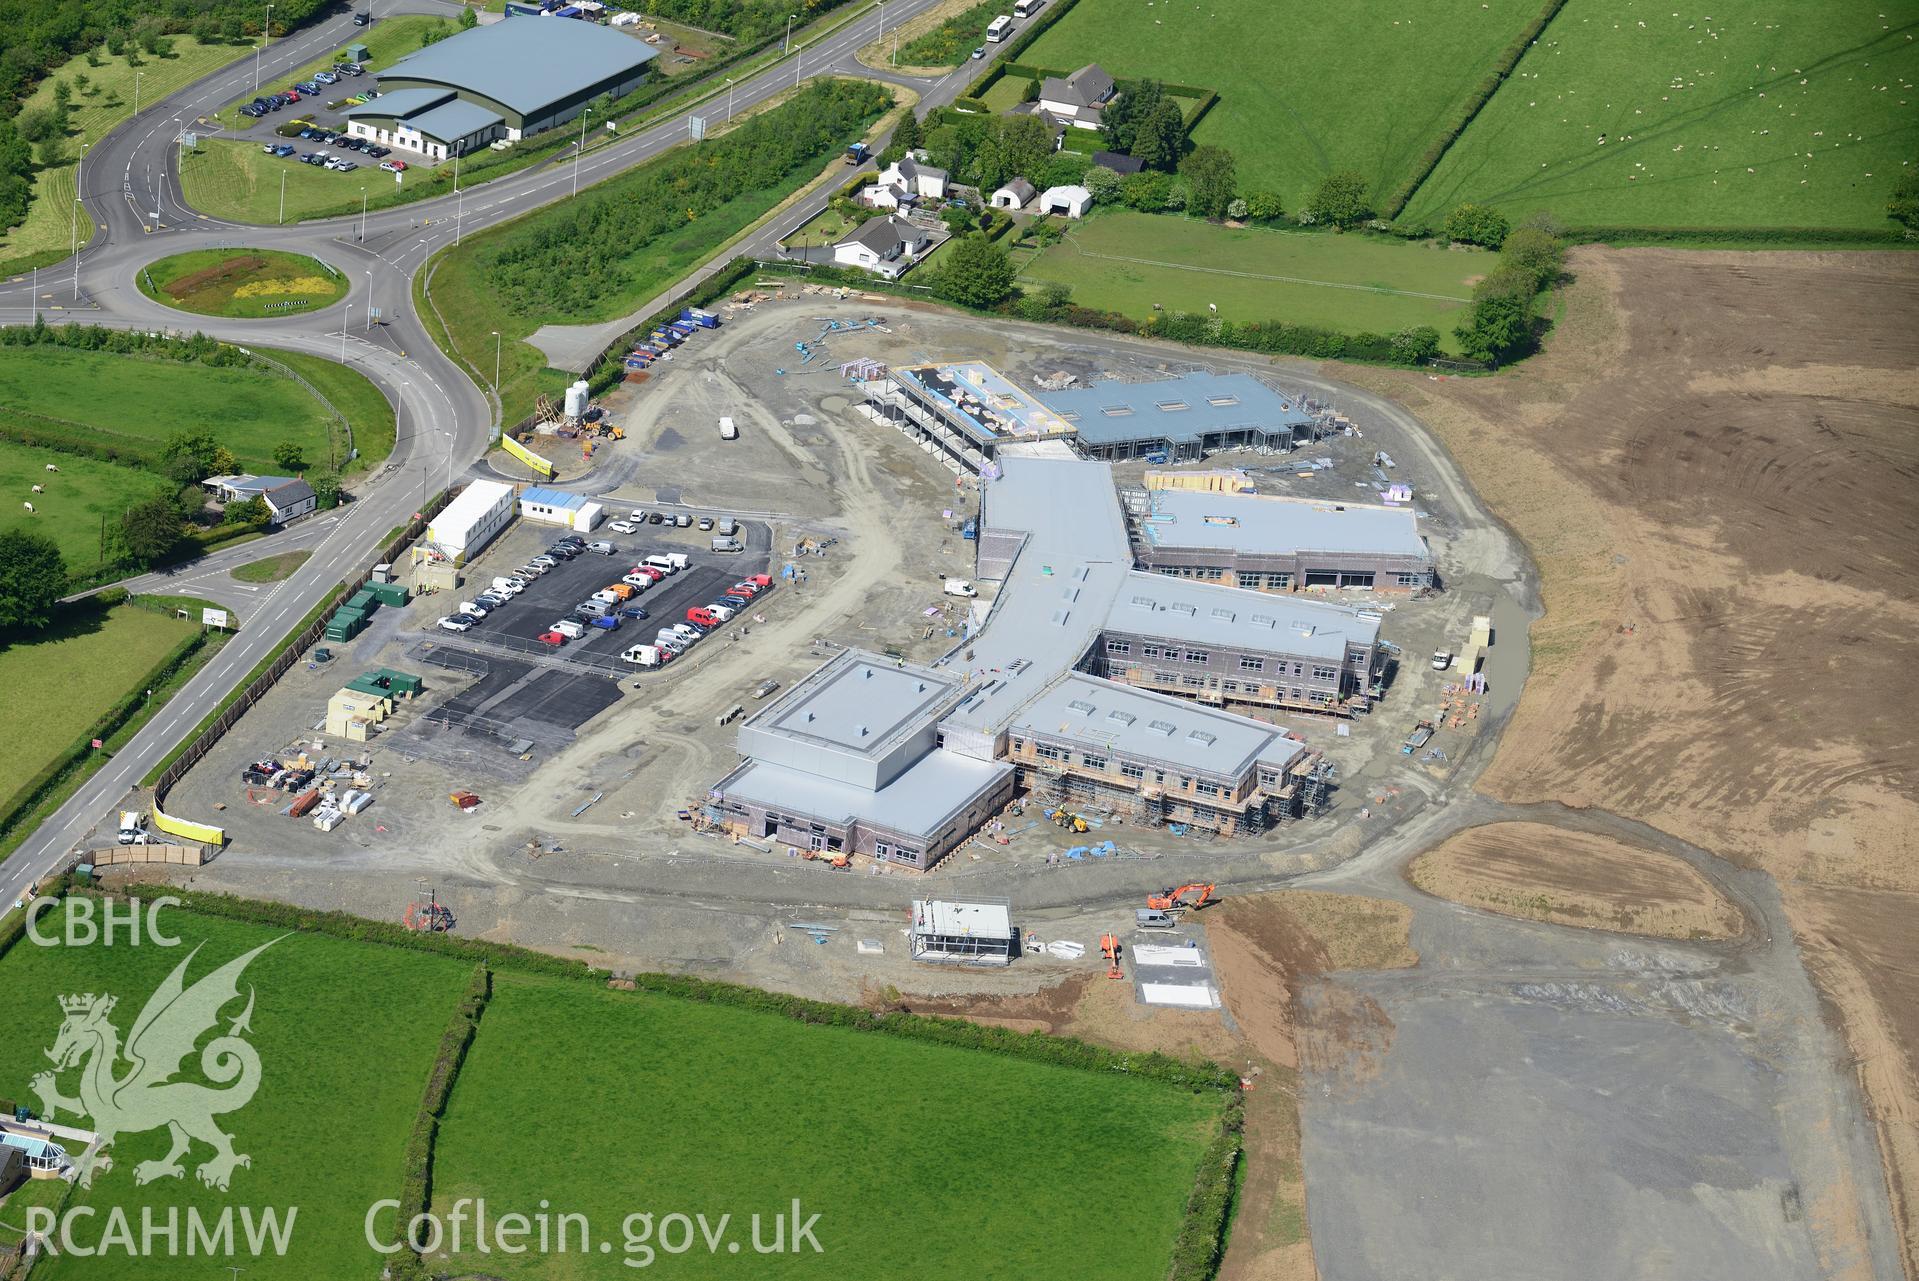 Ysgol Bro Teifi, Llandysul. Oblique aerial photograph taken during the Royal Commission's programme of archaeological aerial reconnaissance by Toby Driver on 3rd June 2015.